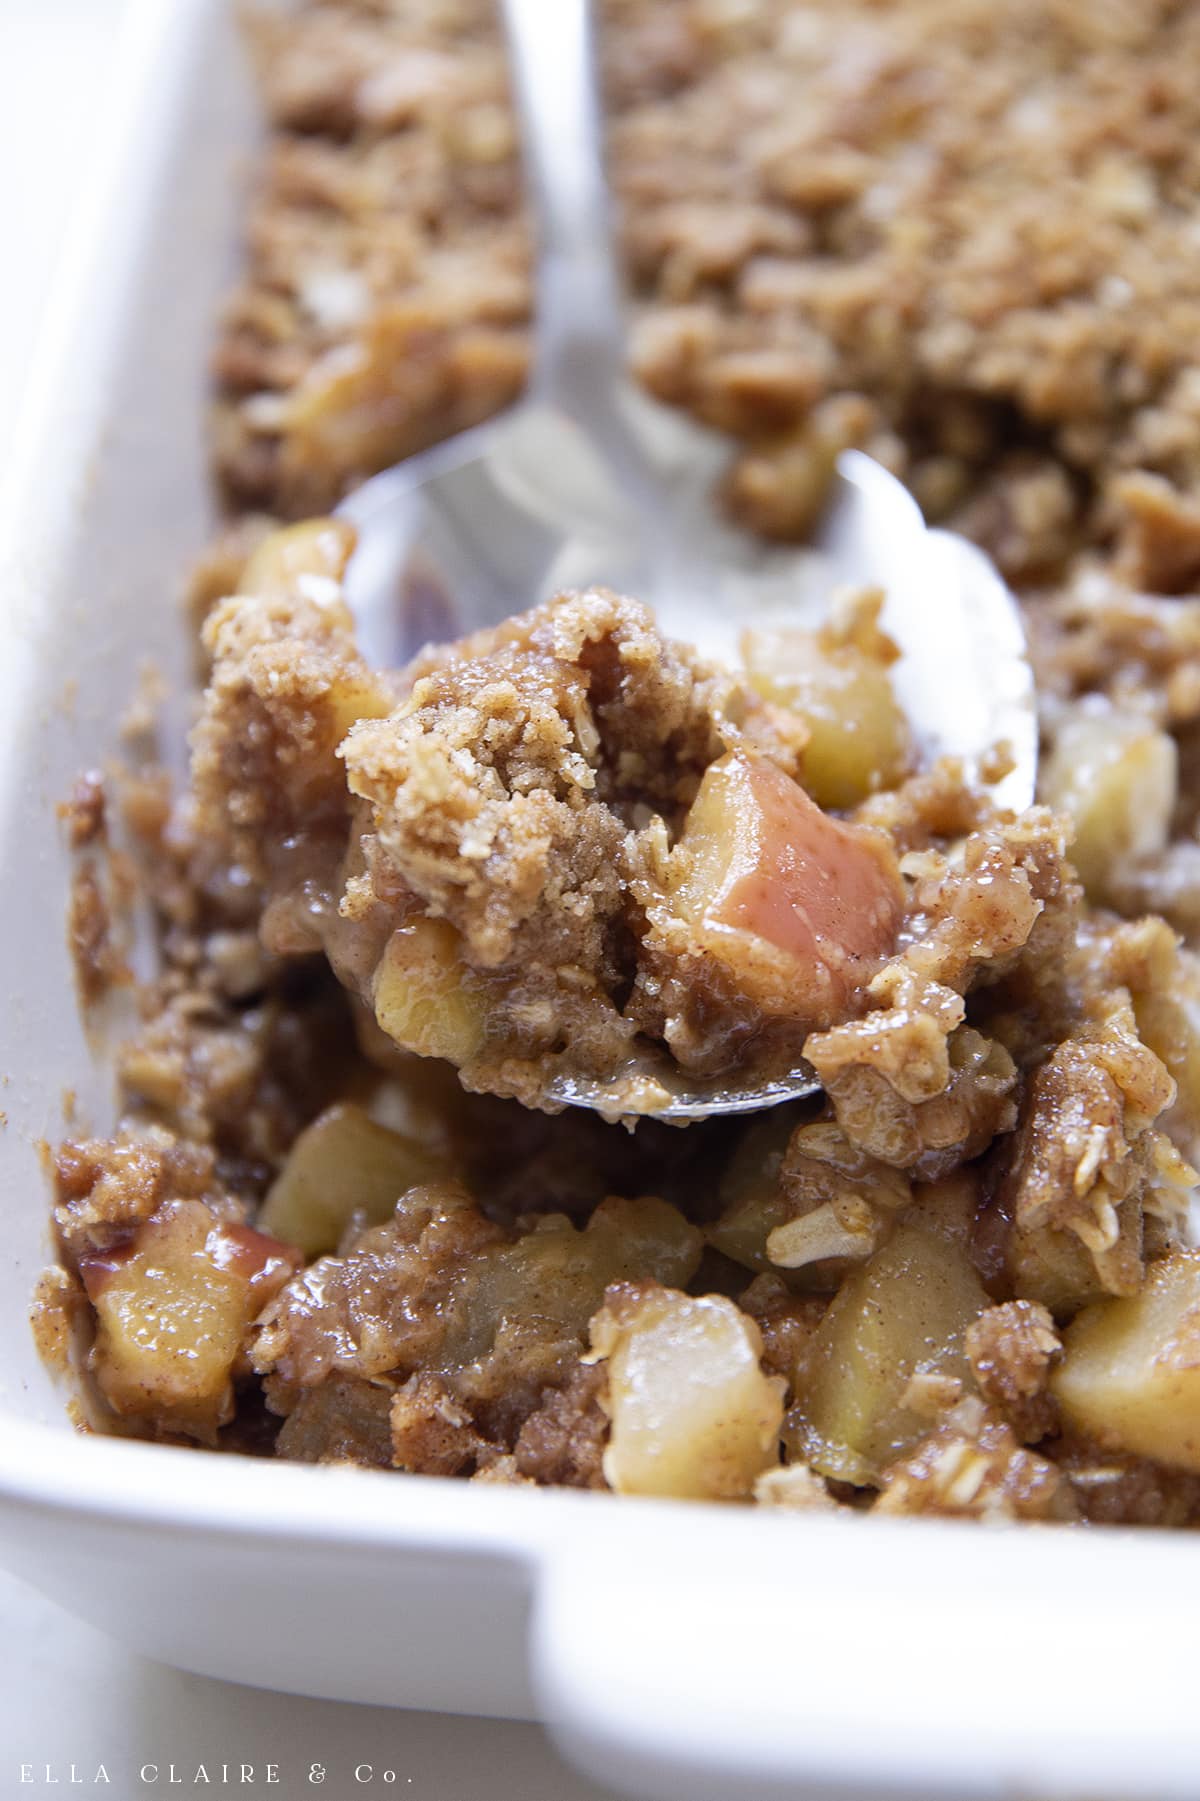 scooping out the apple crumble with oat topping